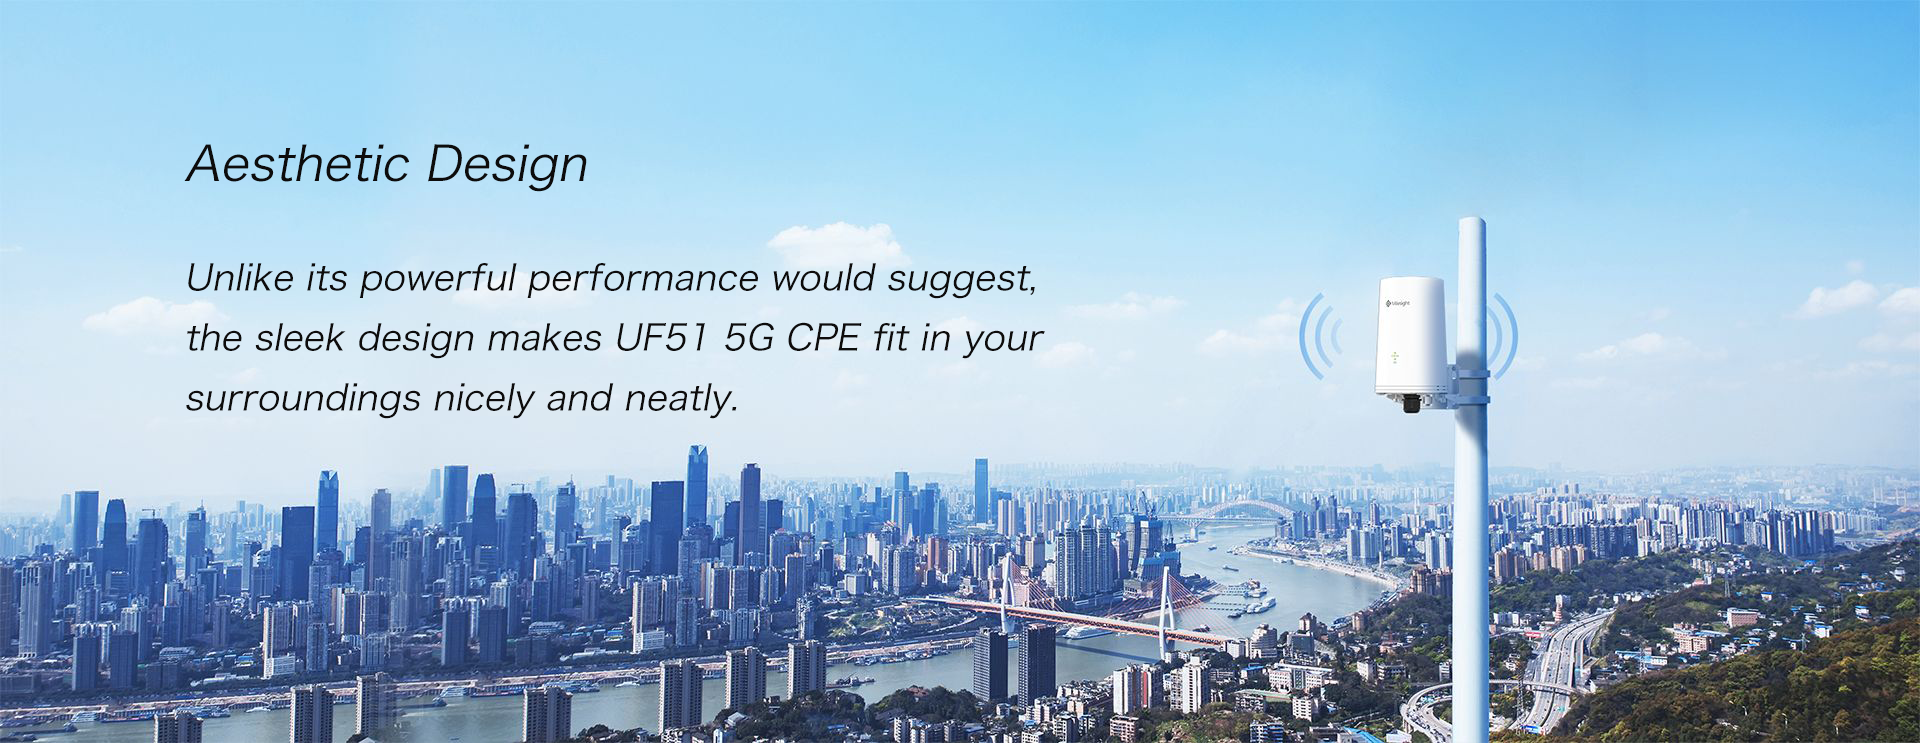 Milesight Industrial Outdoor 4G & 5G CPE Supports the Latest 5G Cellular Network, 2 Ethernets and Dual-Band Wi-Fi Outputs, Powered by POE or DC 9-48V